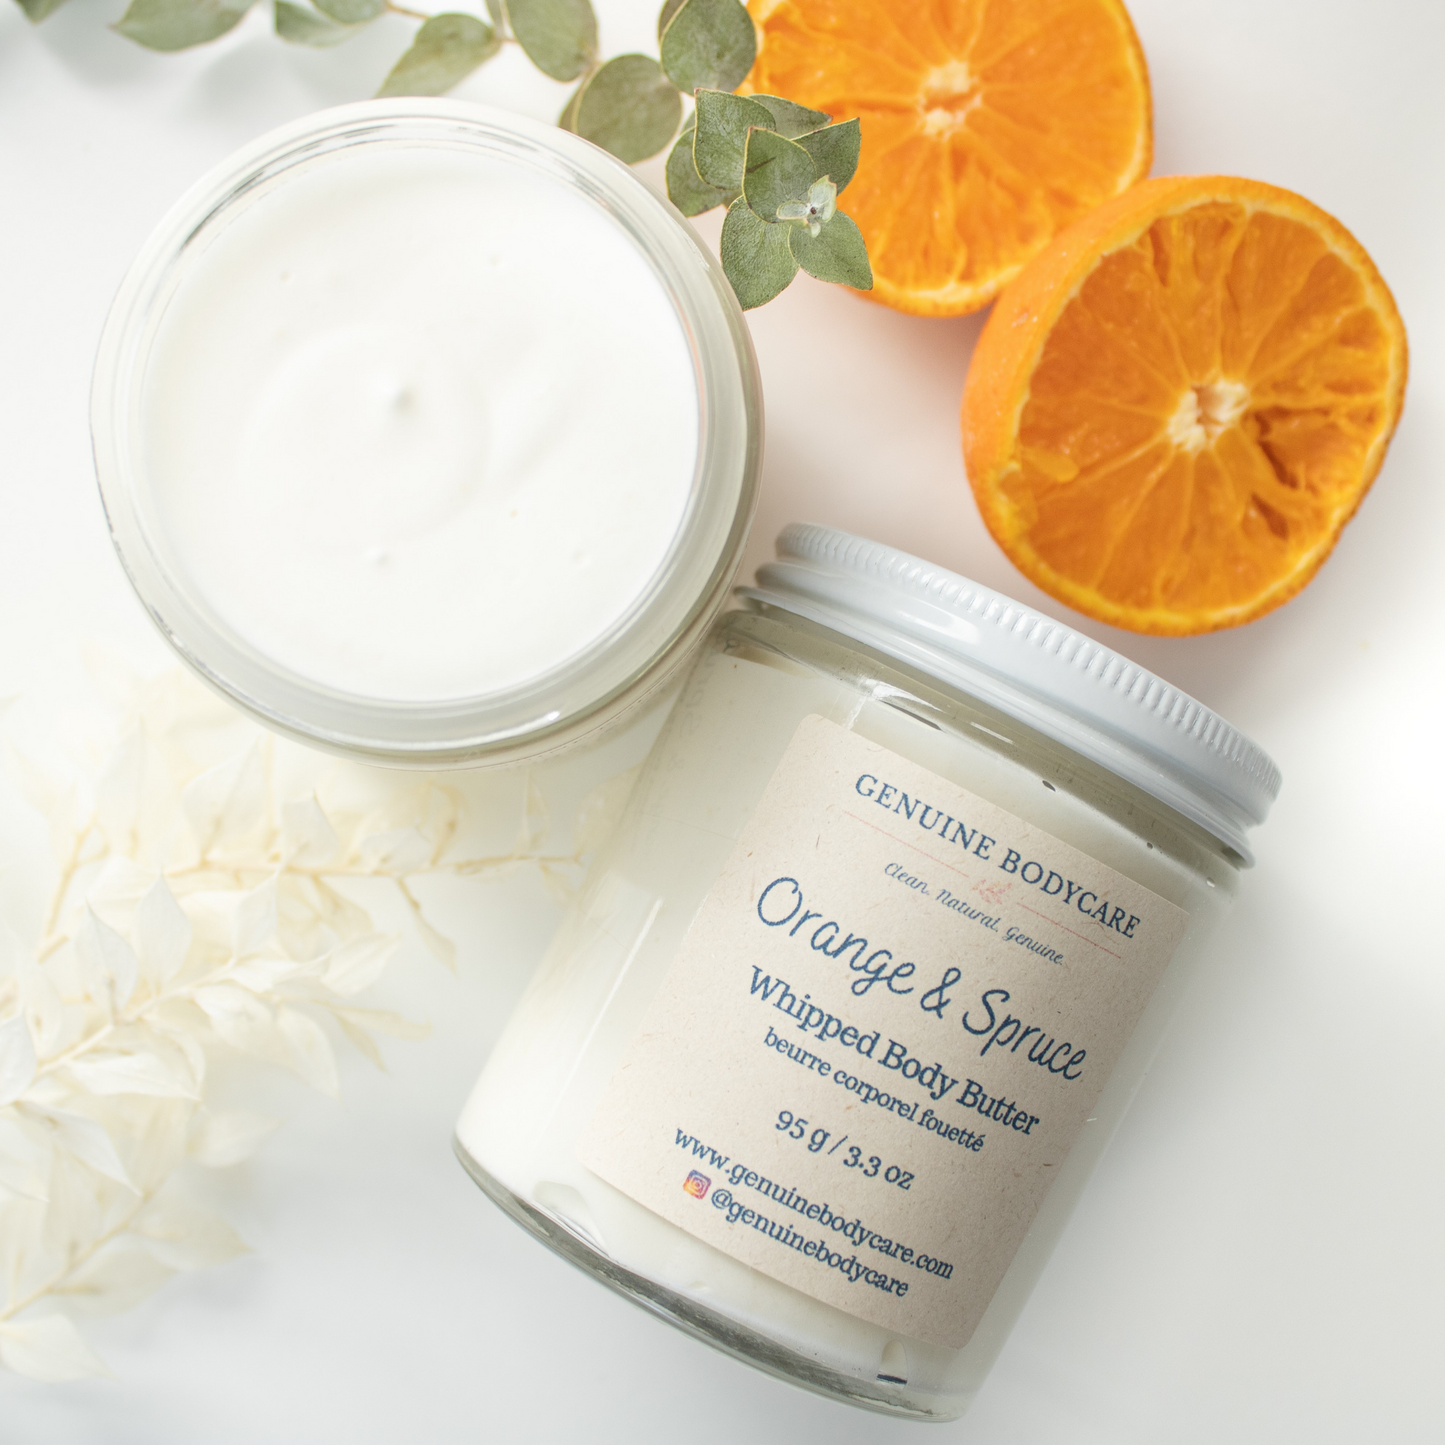 Genuine Bodycare -Whipped Body Butter